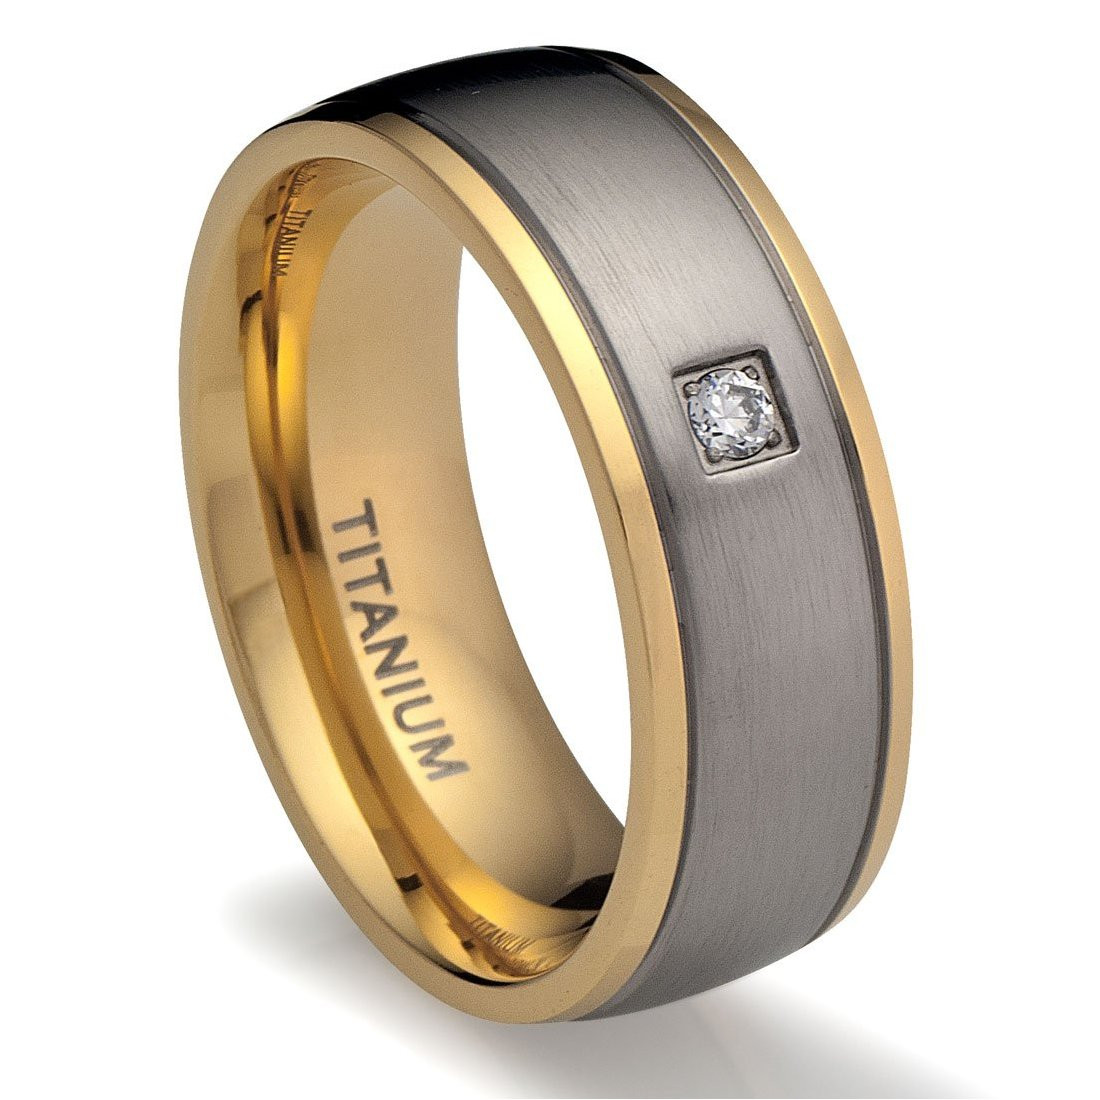 Best Wedding Bands For Men
 Keep these Points in Mind When Picking Men’s Wedding Bands